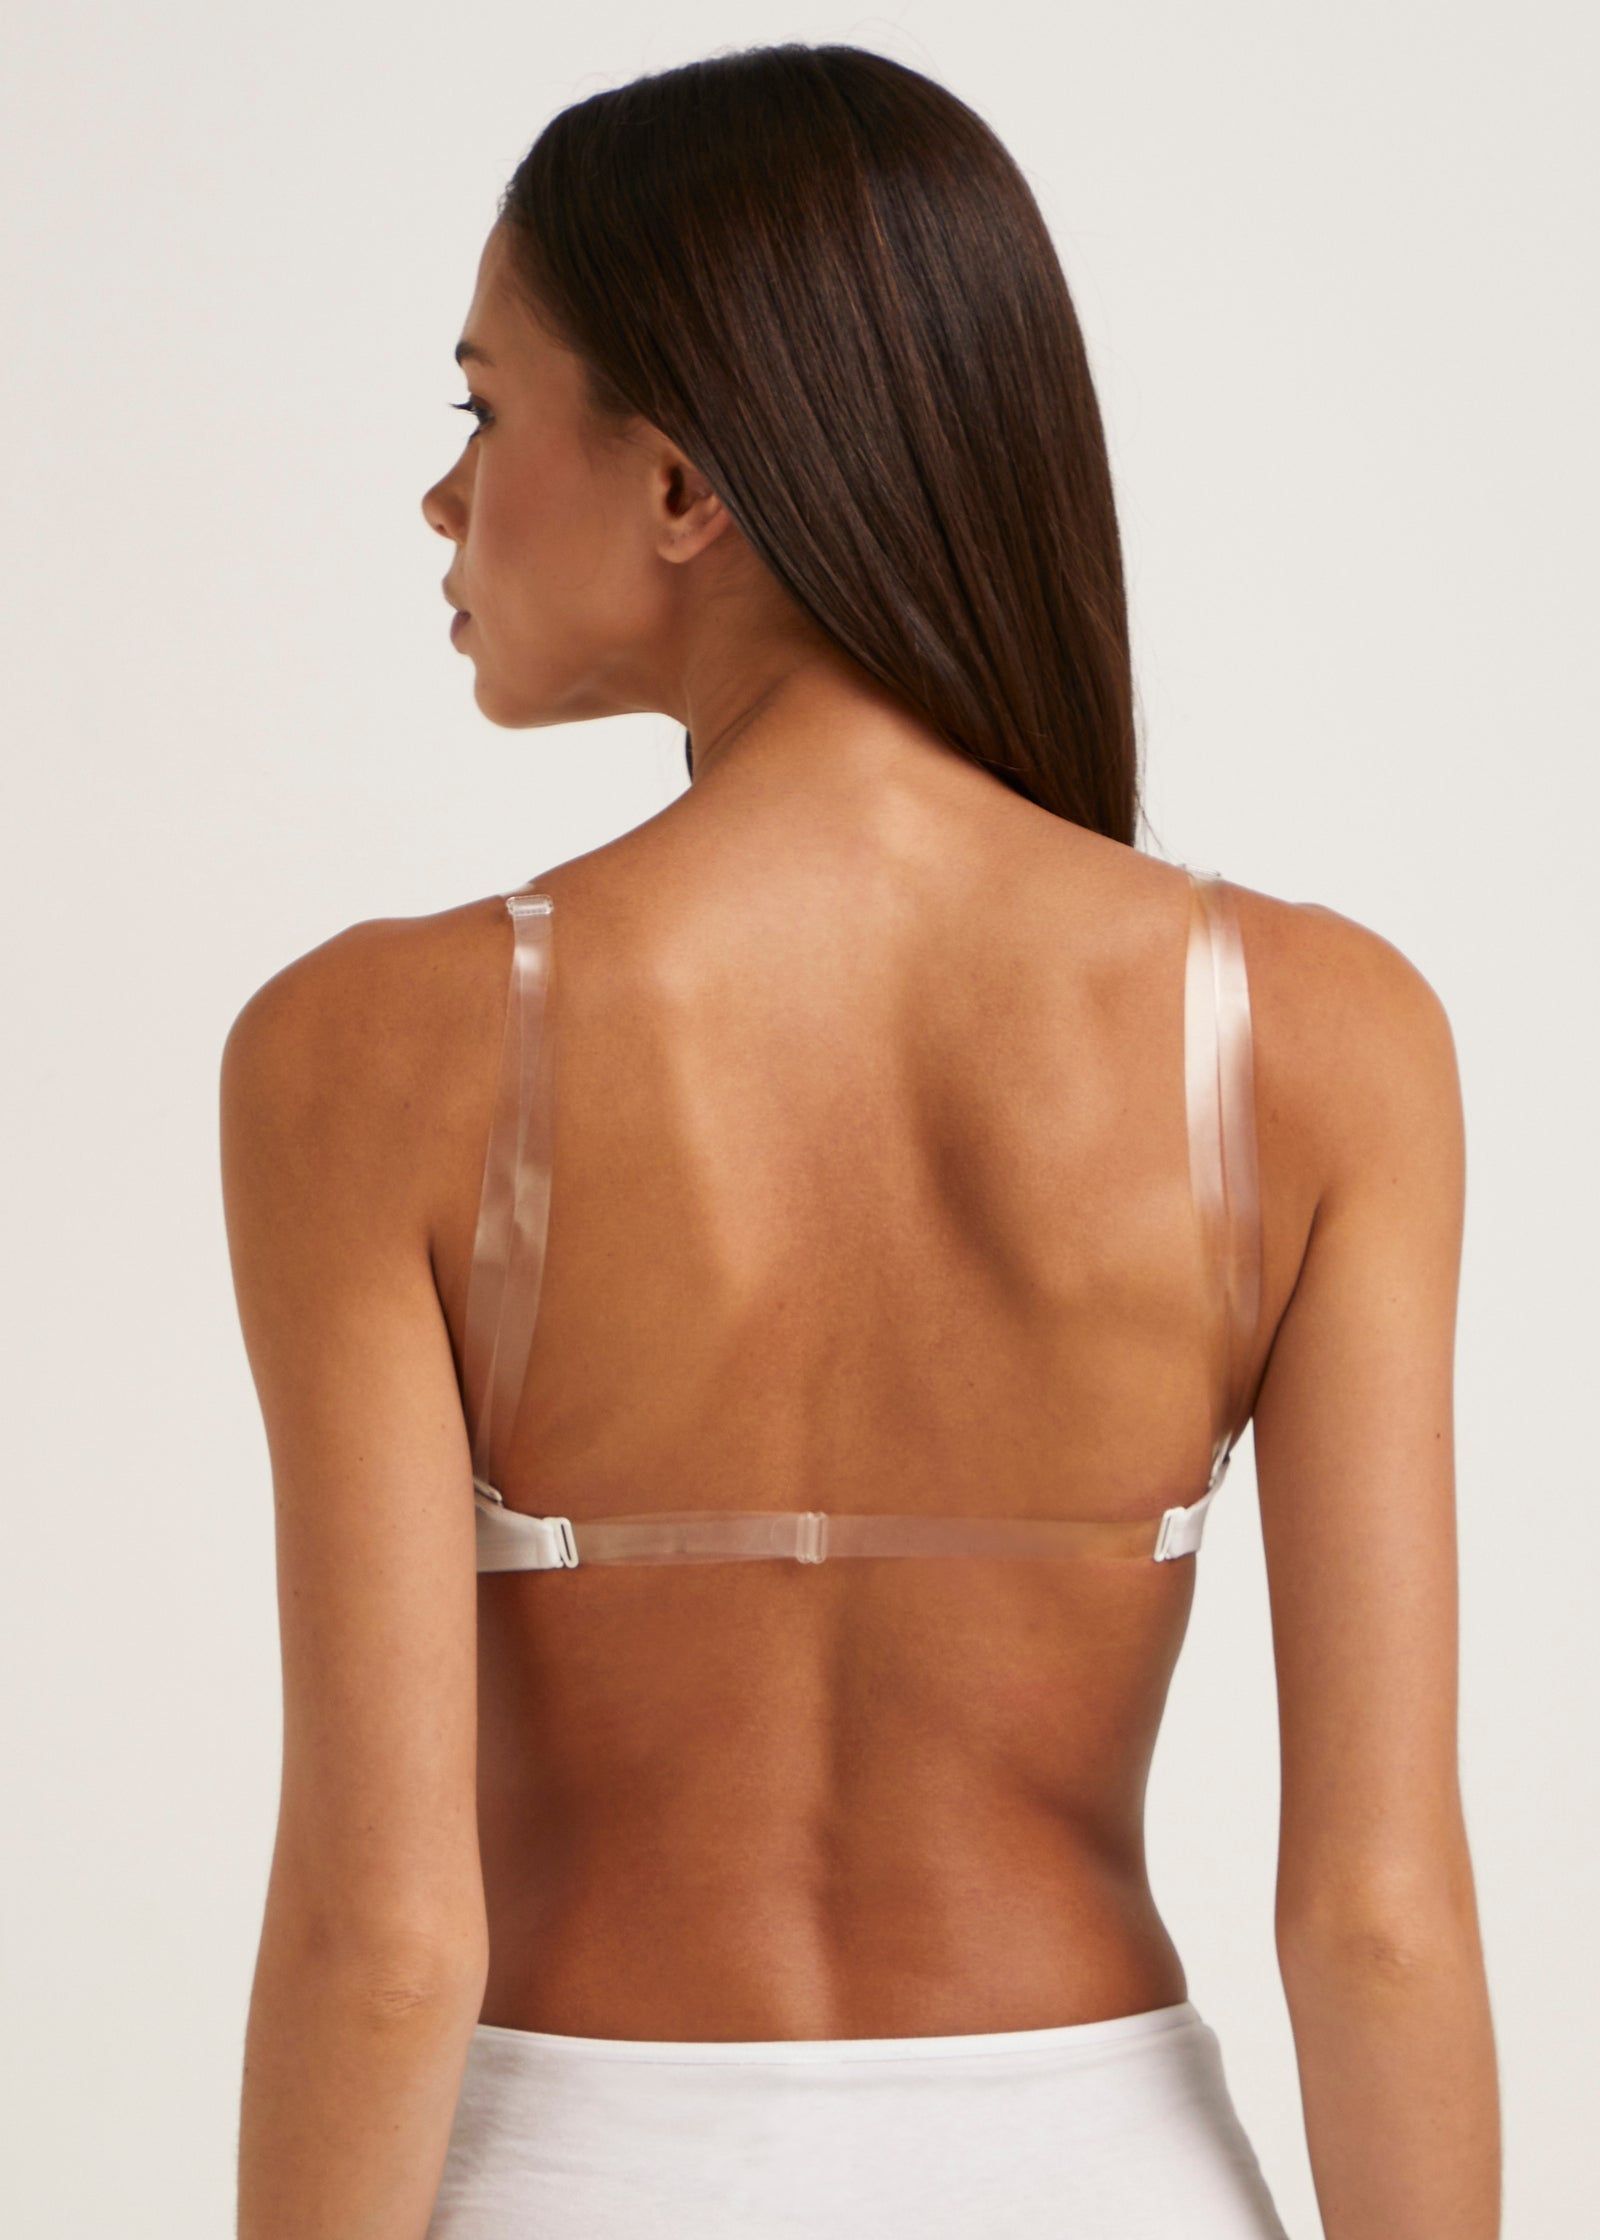 Buy Multiway Clear Strap Bra Online in UAE from Matalan